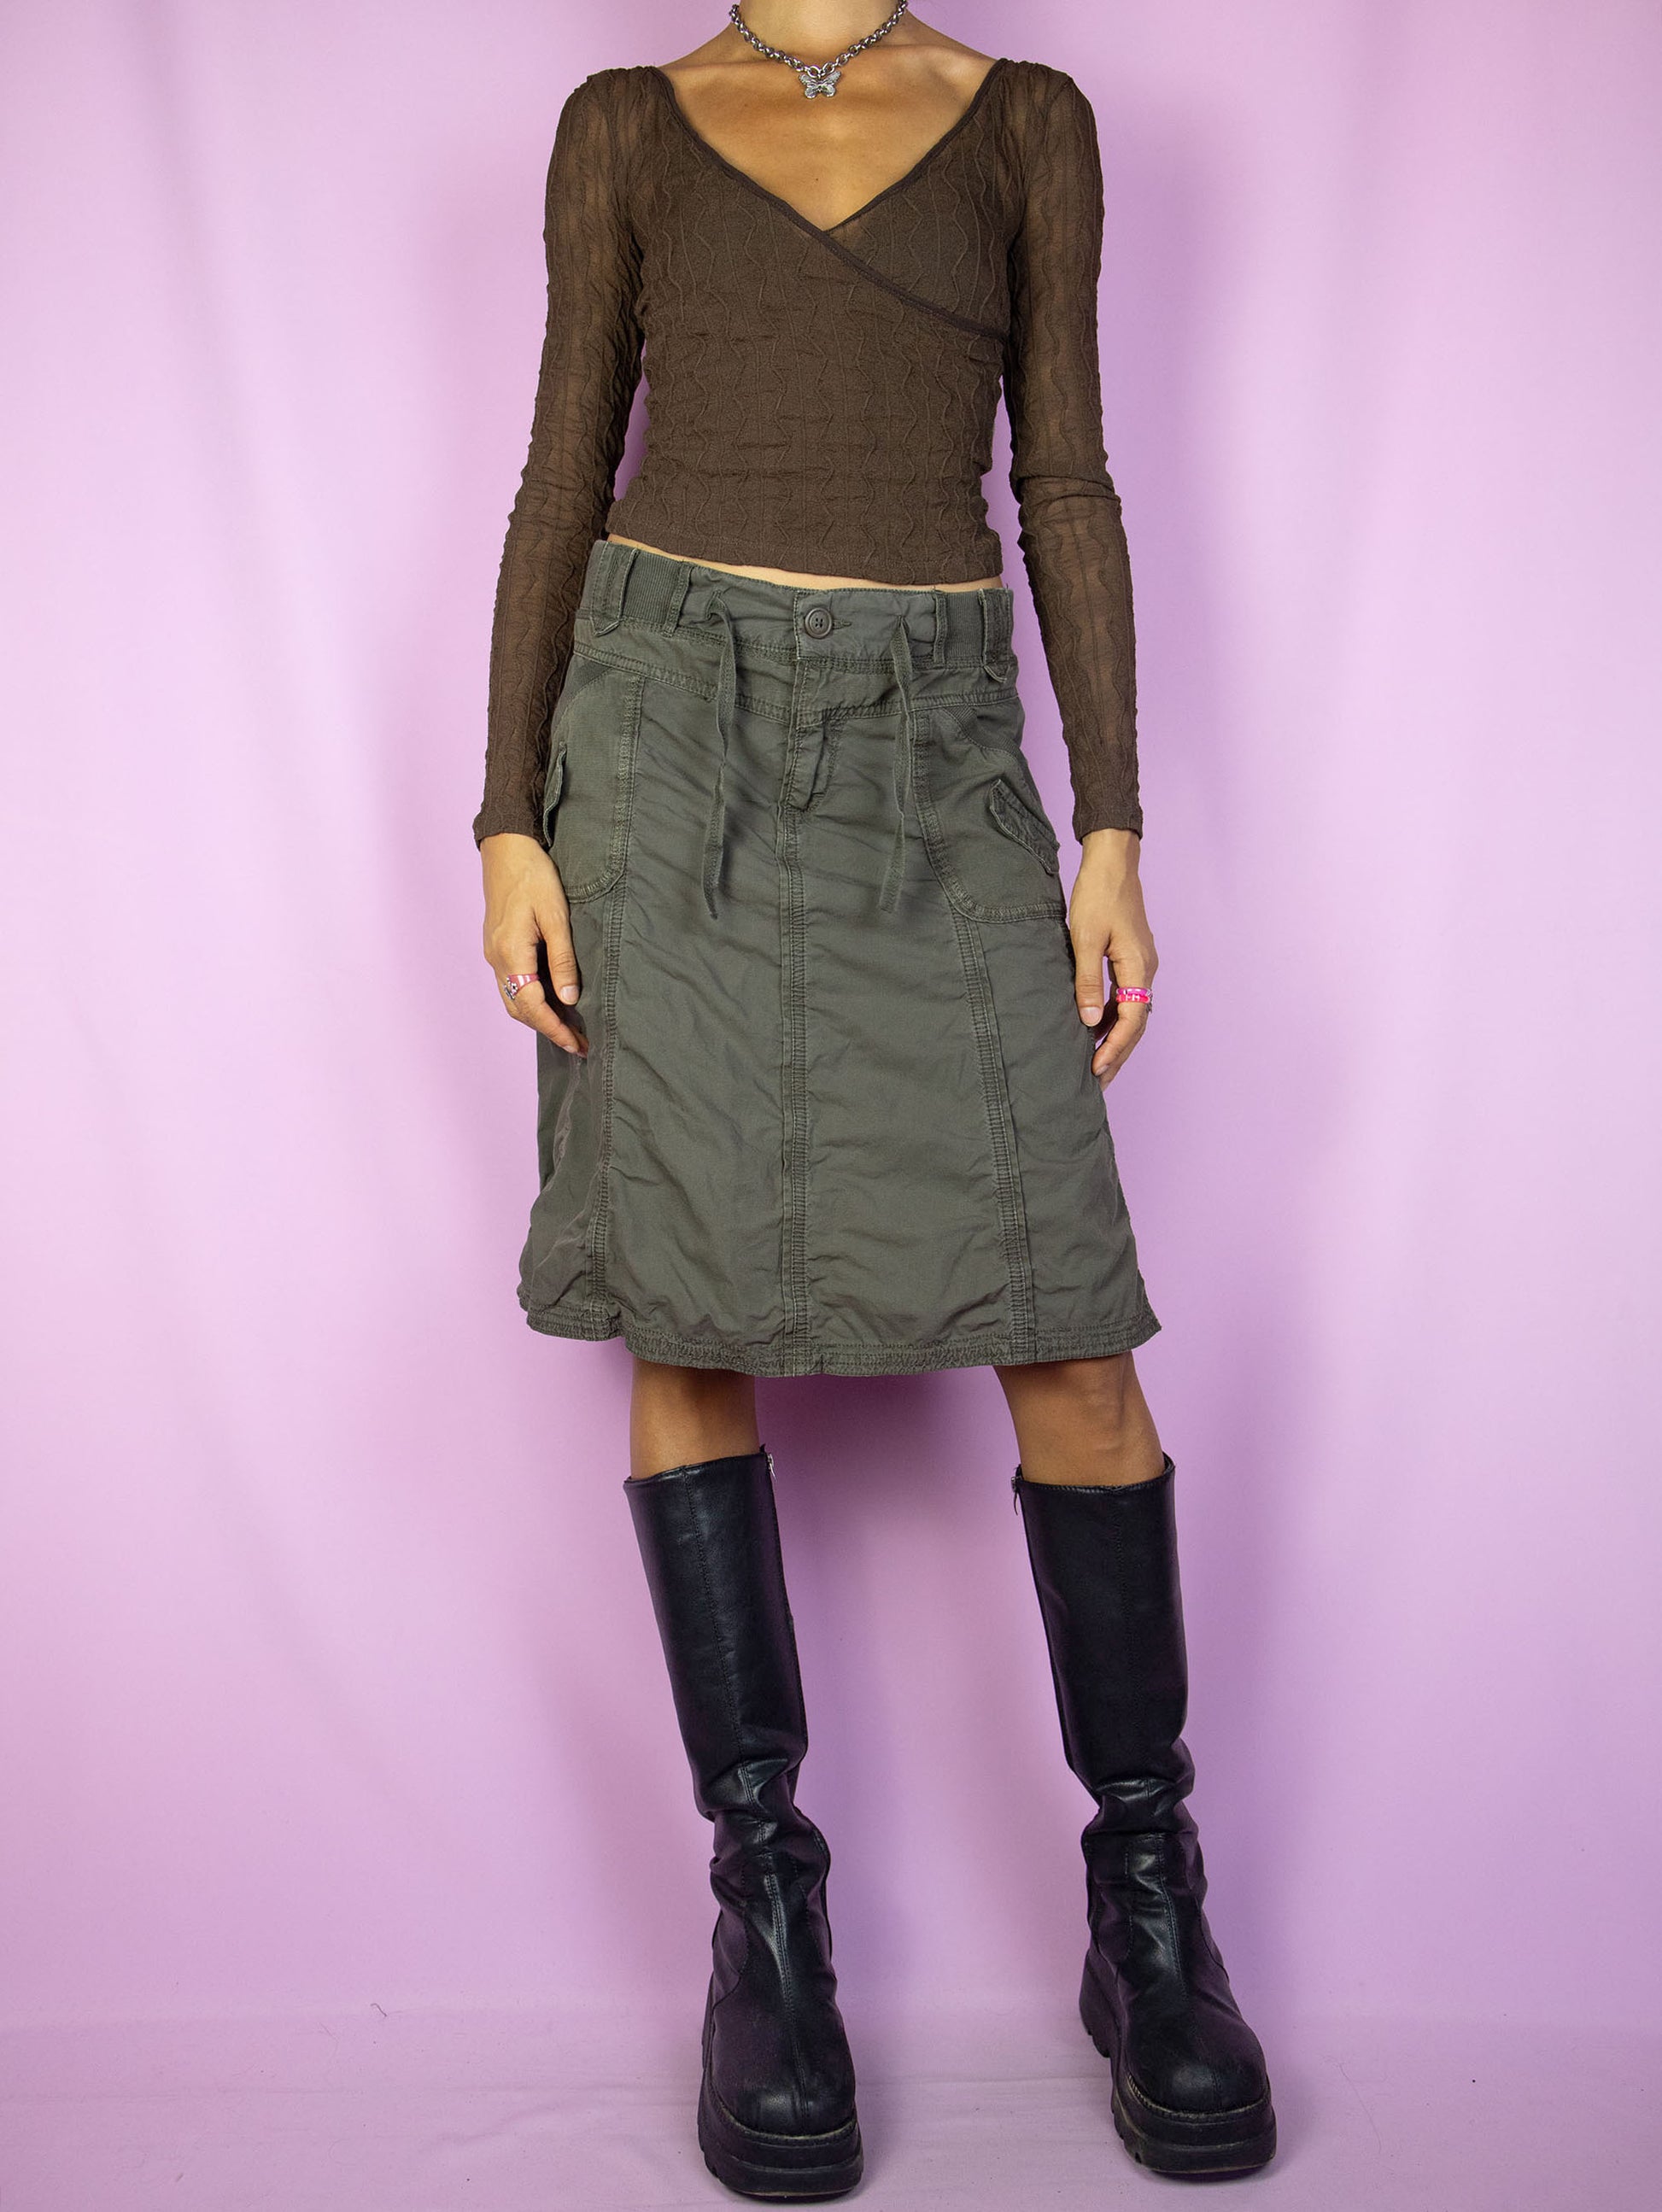 The Y2K Subversive Khaki Cargo Skirt is a vintage dark khaki green flared skirt with pockets and a front zipper closure. A gorgeous utility cargo style gorpcore grunge midi skirt from the 2000s.